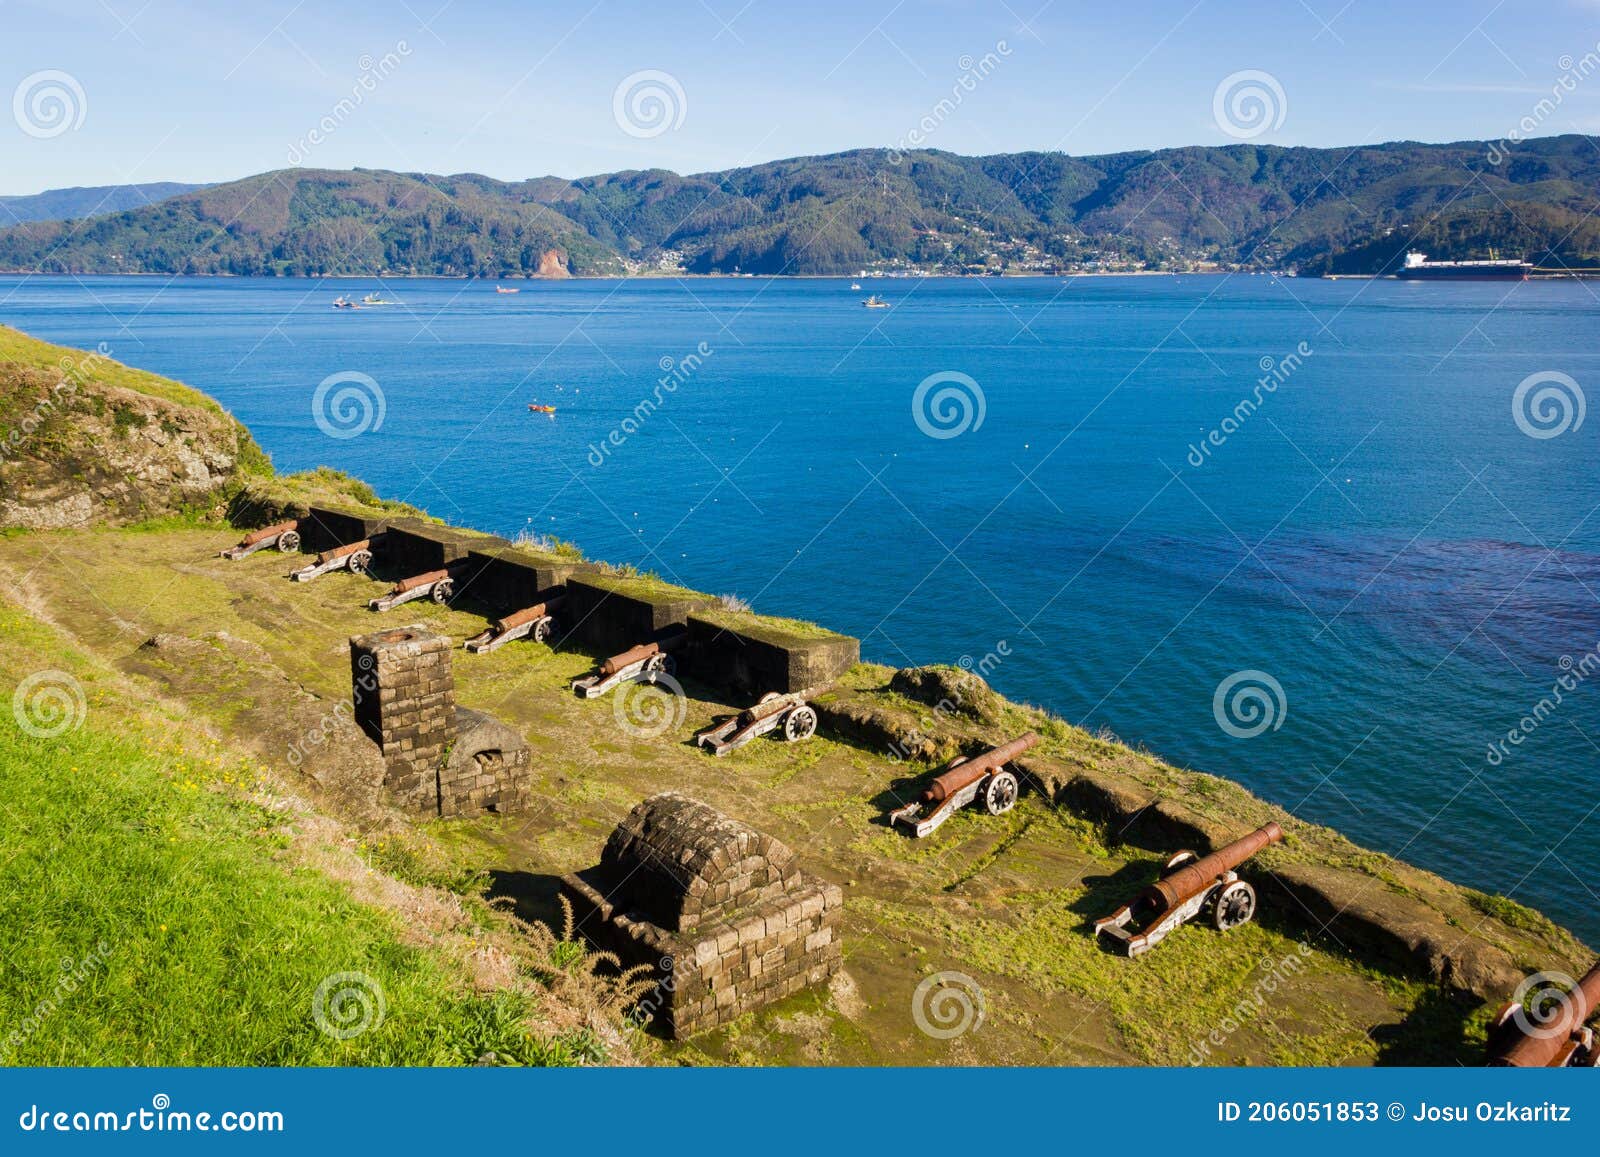 cannons lined up pointing to the sea in fort niebla